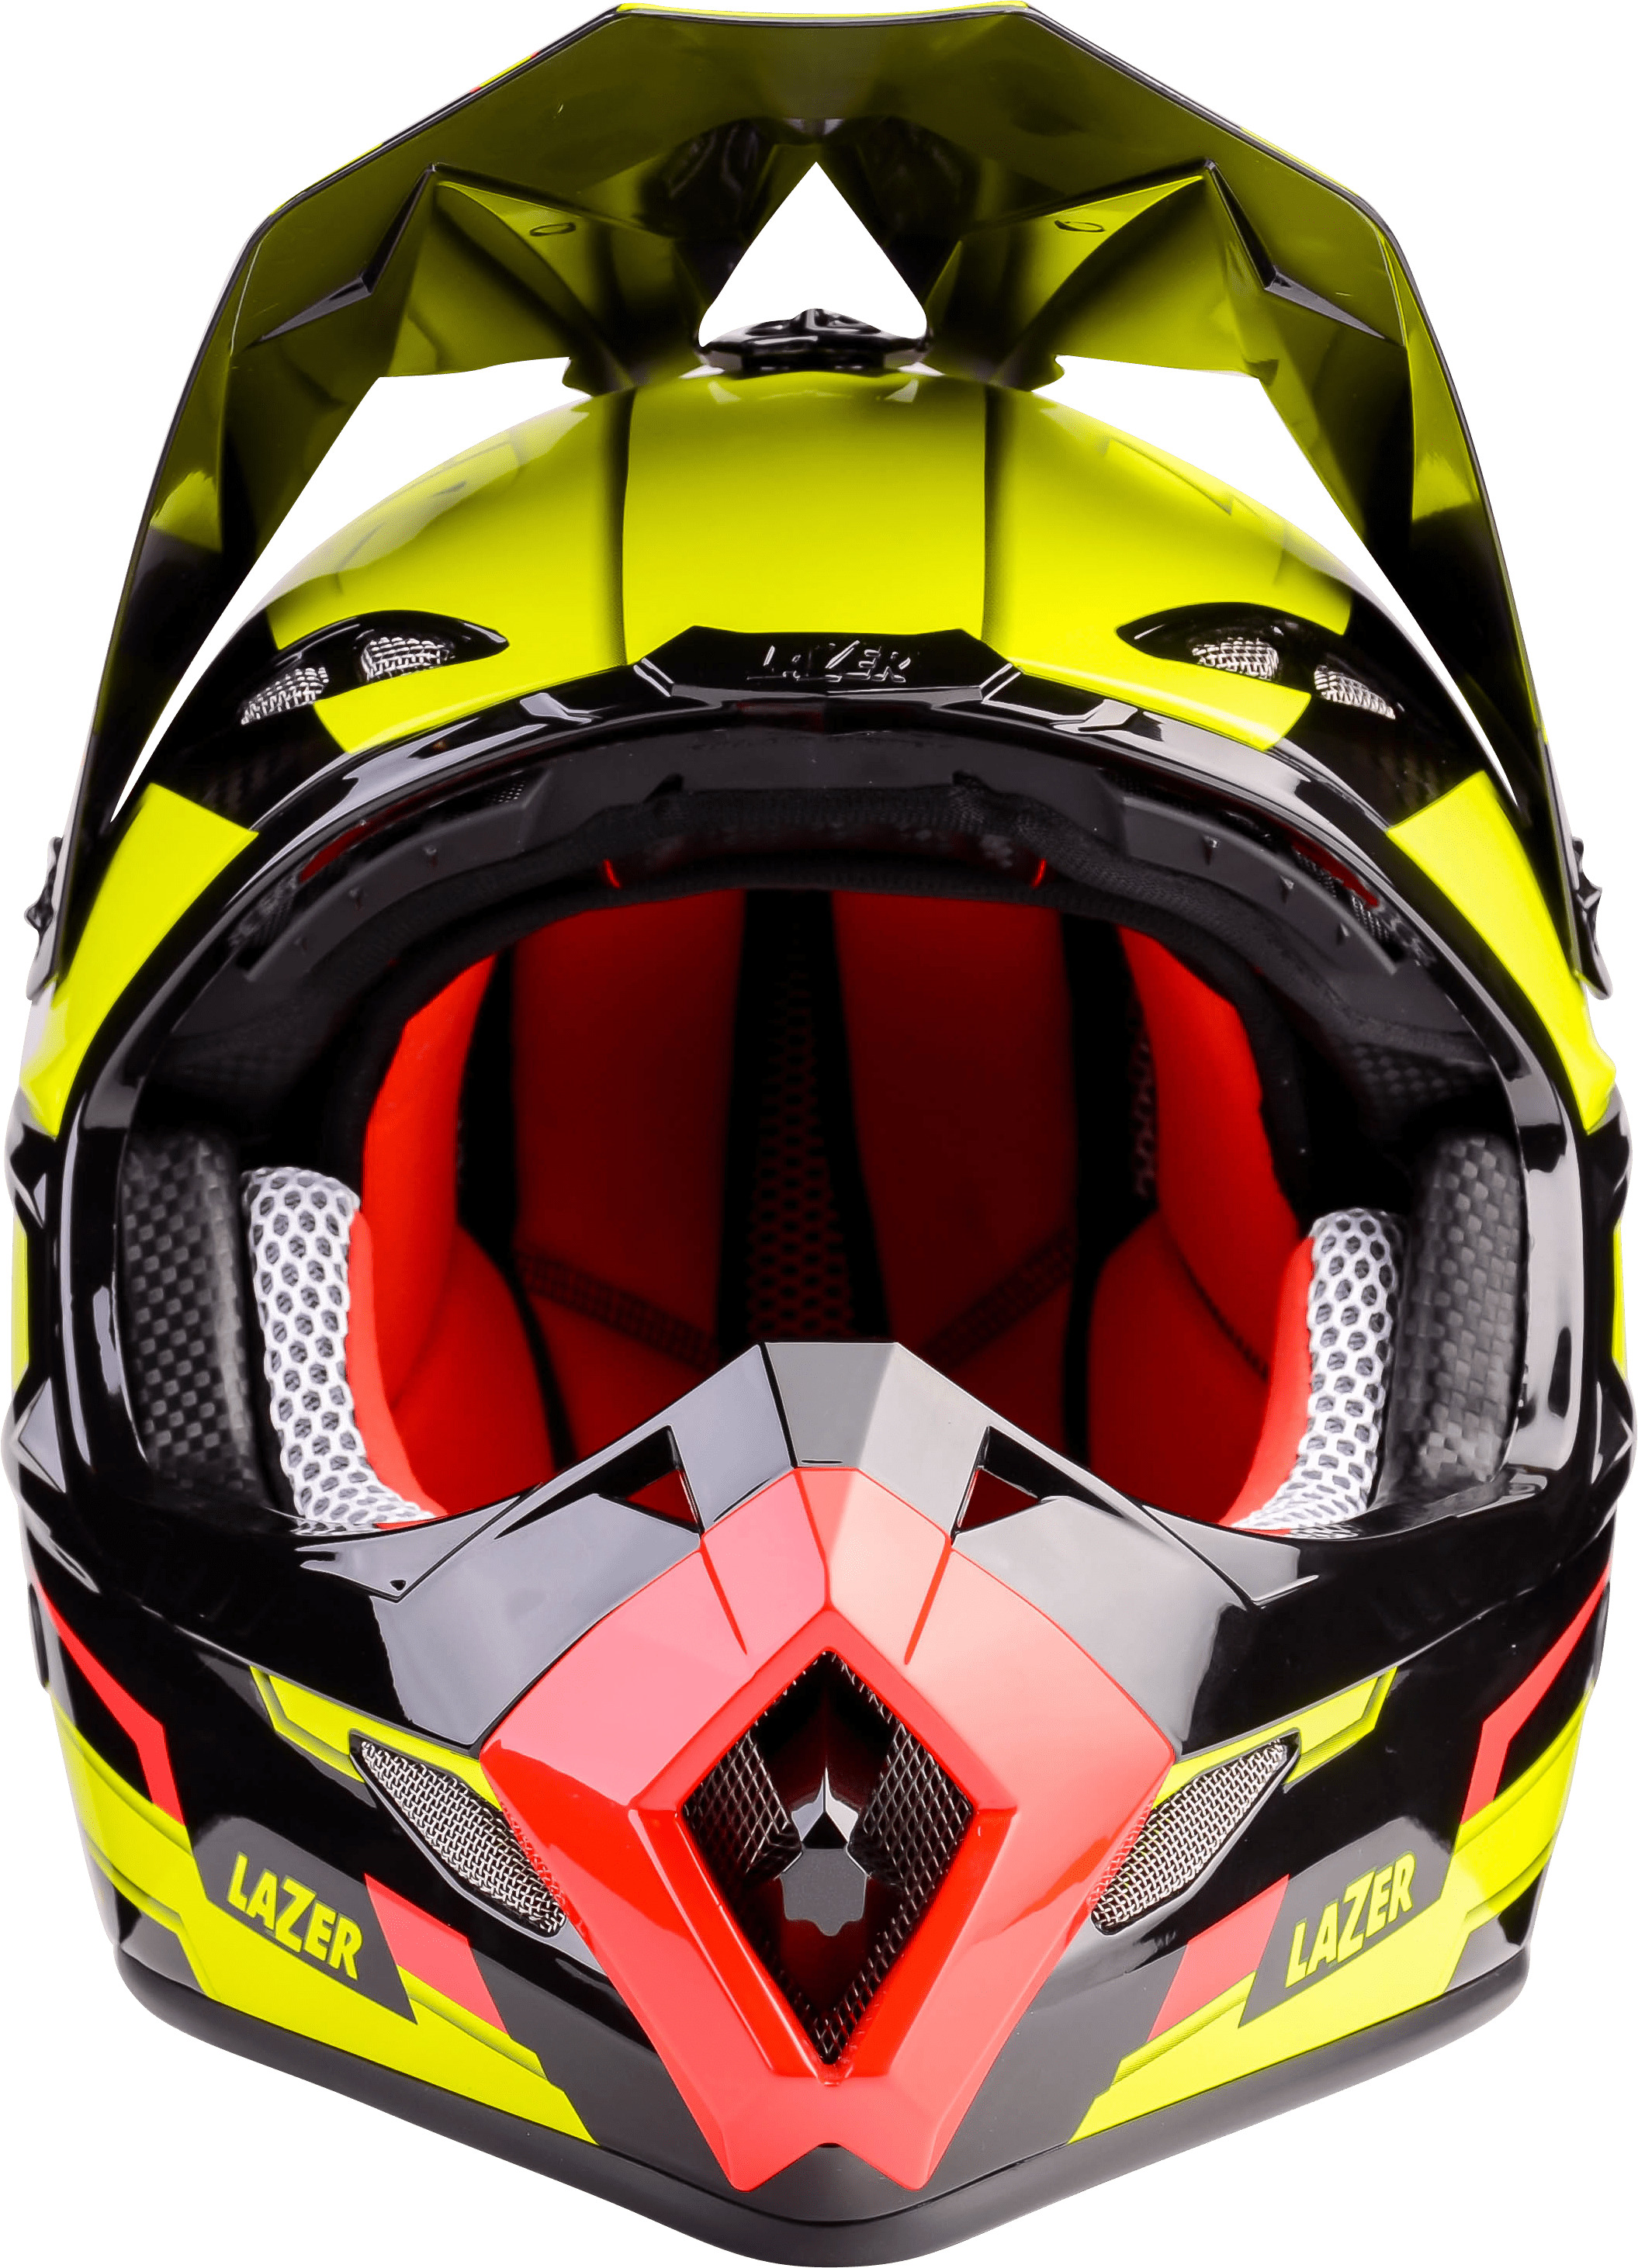 Motorcycle Helmet Lazer MX8 Geotech Pure Carbon Yellow Black Red Front icons